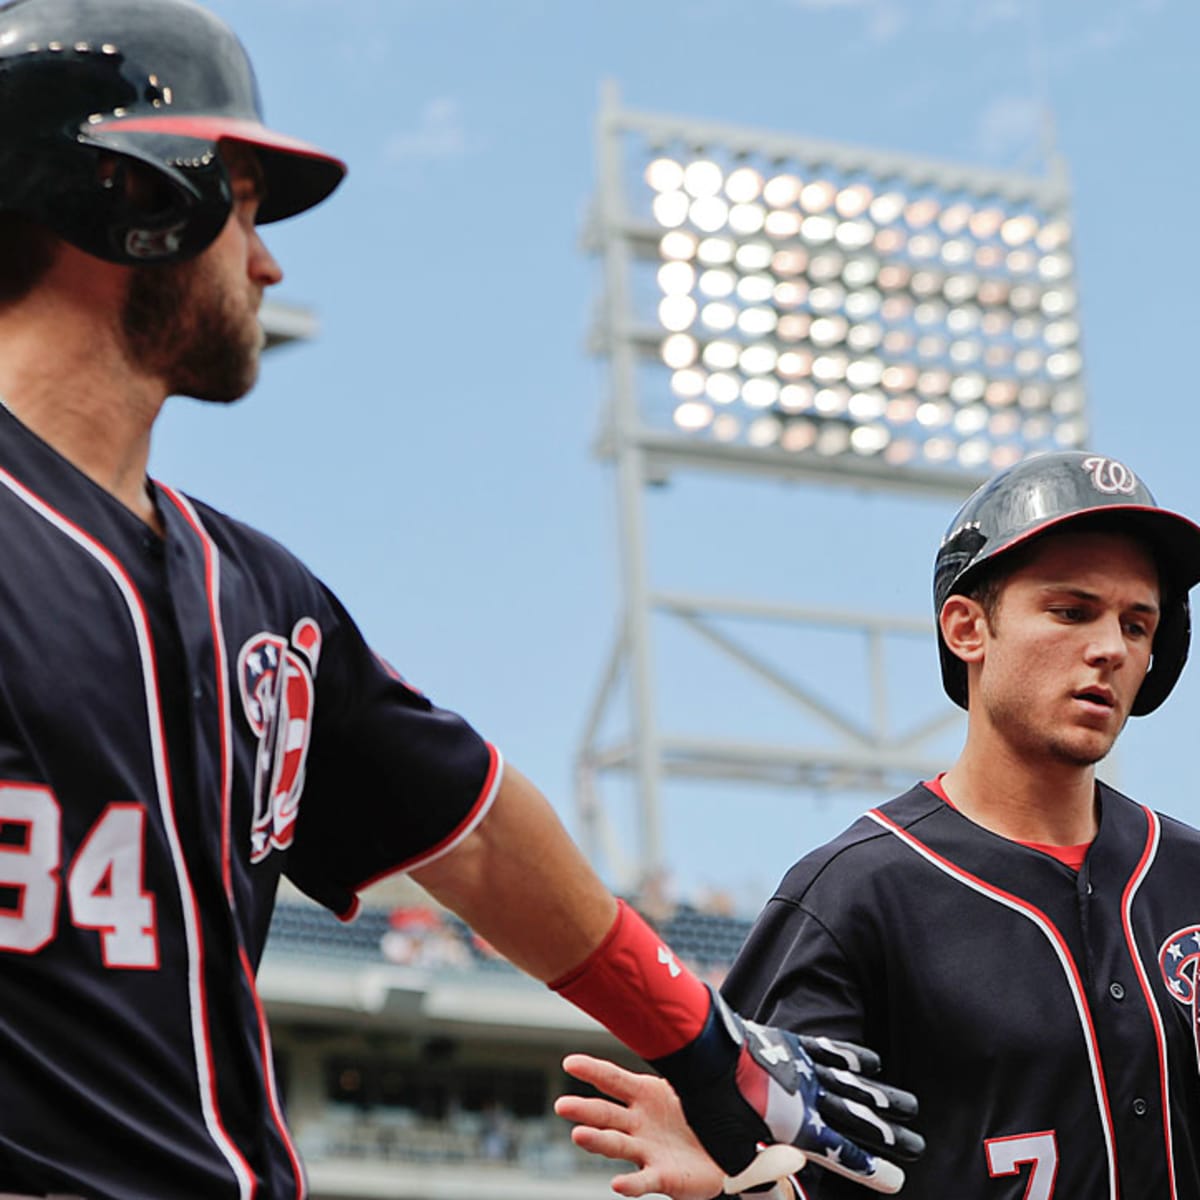 Nationals manager Dusty Baker talks to Bryce Harper about admiring